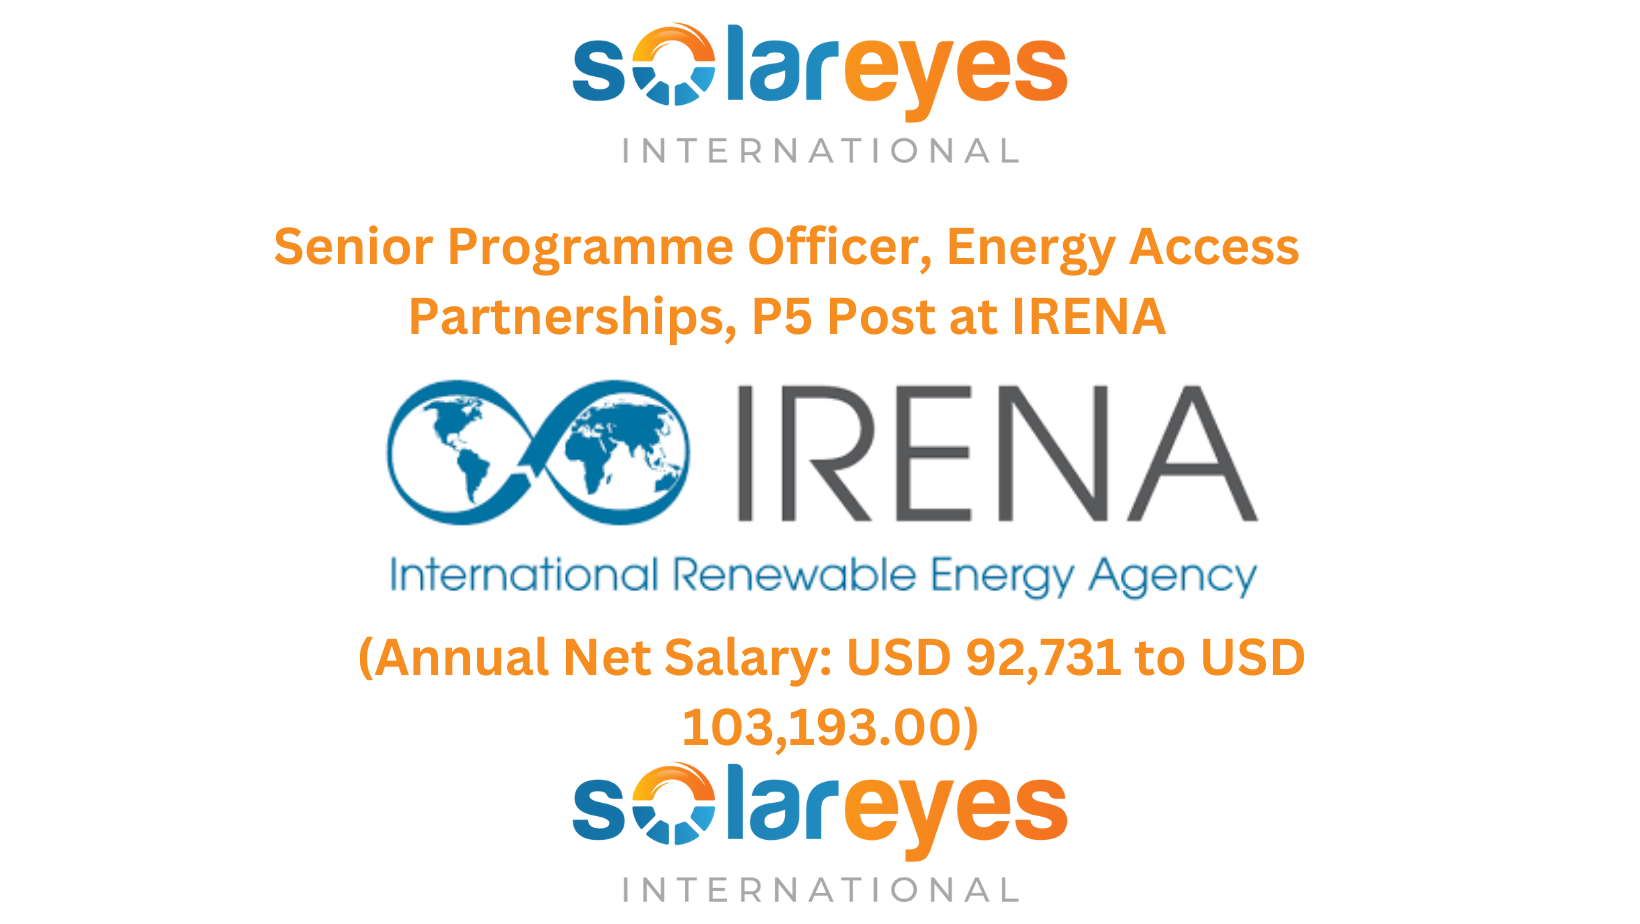 Senior Programme Officer, Energy Access Partnerships, P5 Post at IRENA (Annual Net Salary: USD 92,731 to USD 103,193.00)